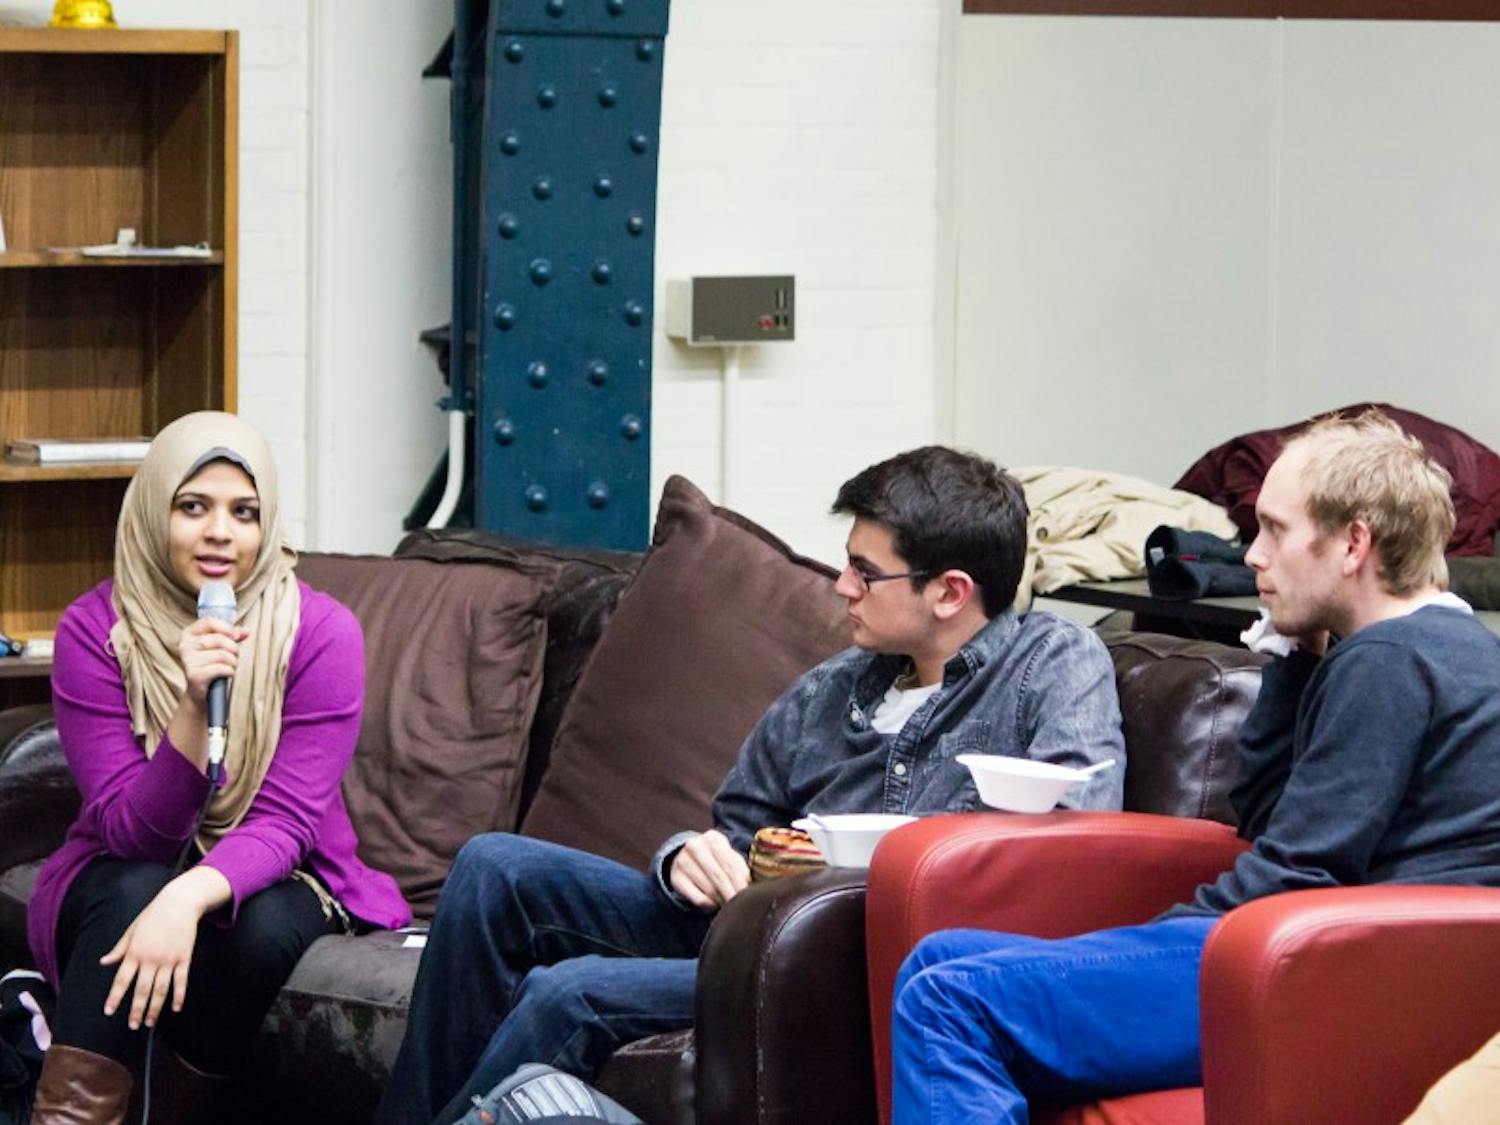 The Muslim Student Association celebrated the beginning of Islam Appreciation Week with a social in the Red Gym, where they discussed Islam.